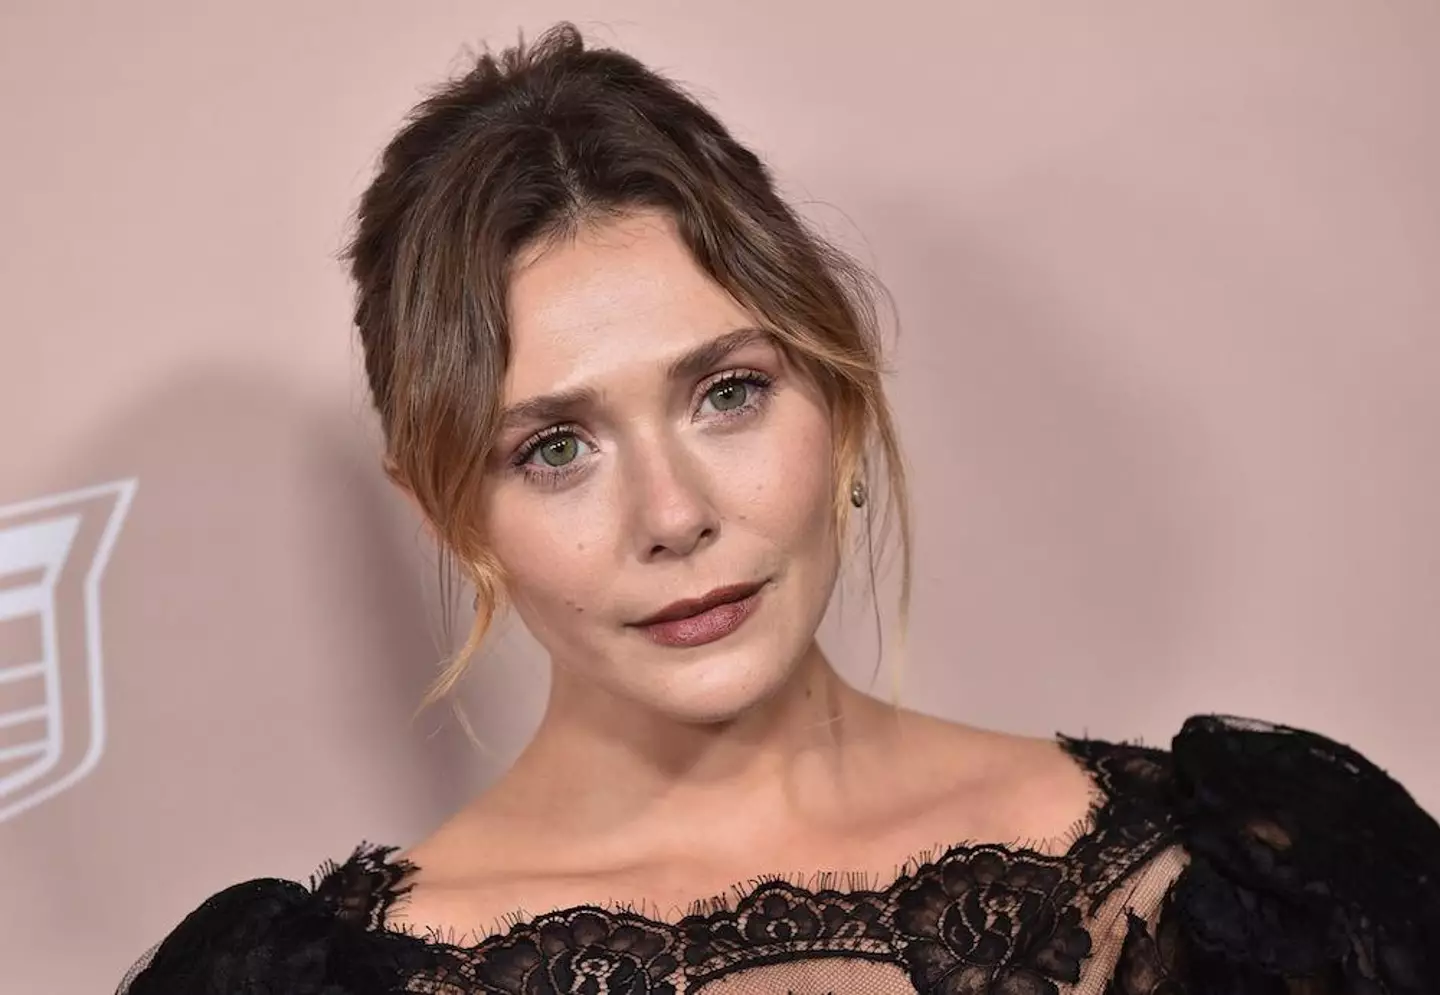 People think the demonic doll bears an uncanny resemblance to Elizabeth Olsen.